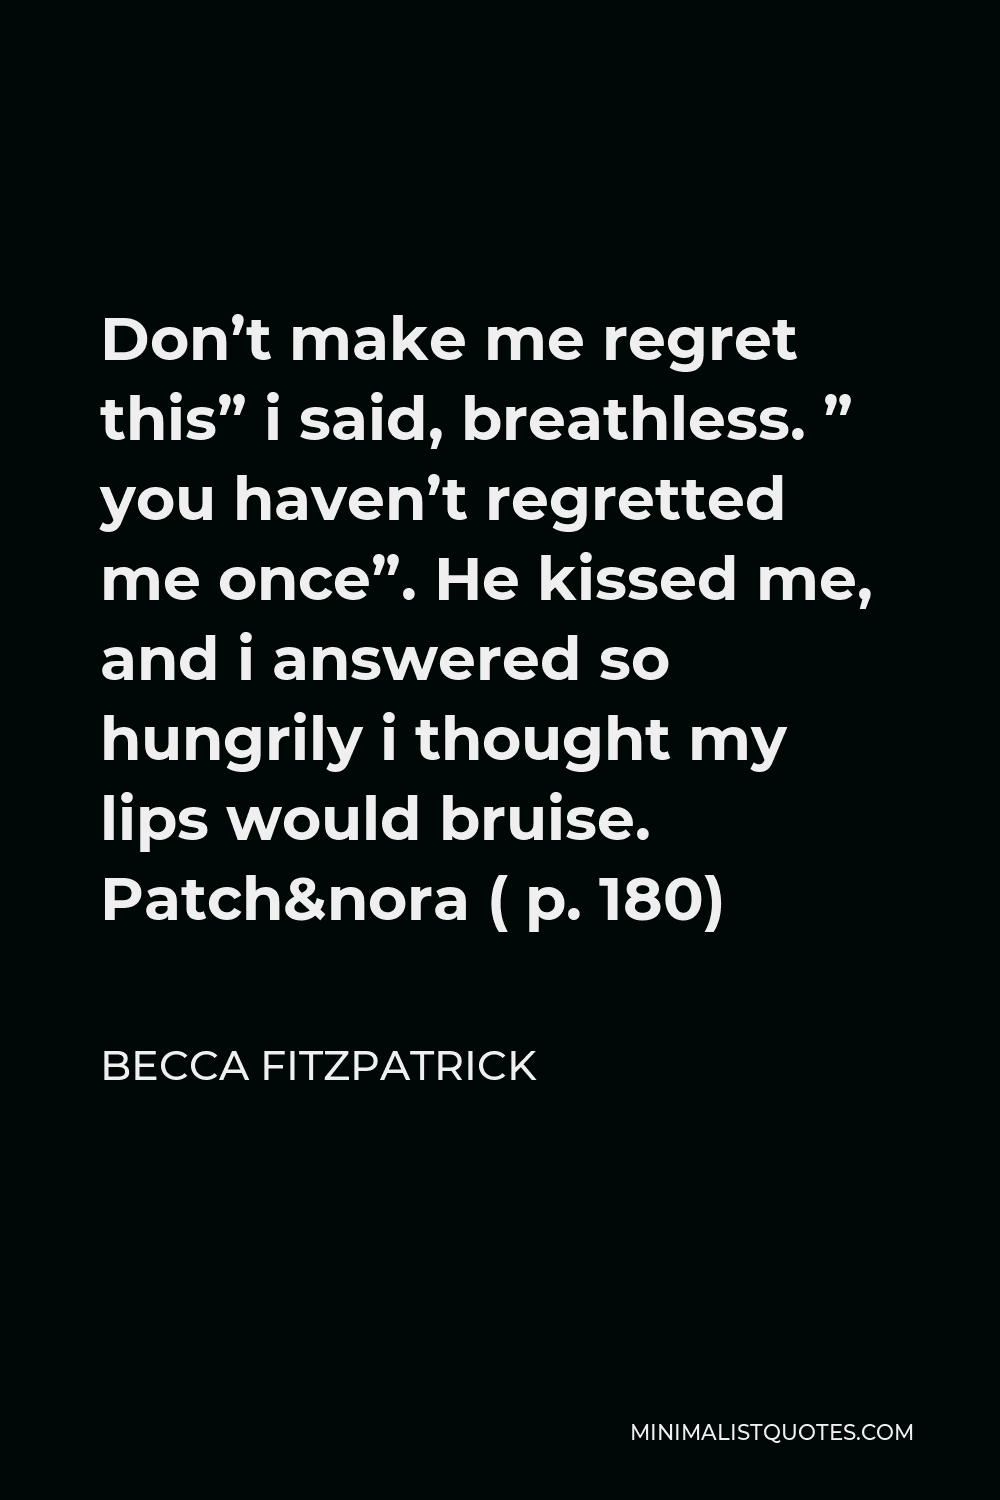 Becca Fitzpatrick Quote - Don’t make me regret this” i said, breathless. ” you haven’t regretted me once”. He kissed me, and i answered so hungrily i thought my lips would bruise. Patch&nora ( p. 180)